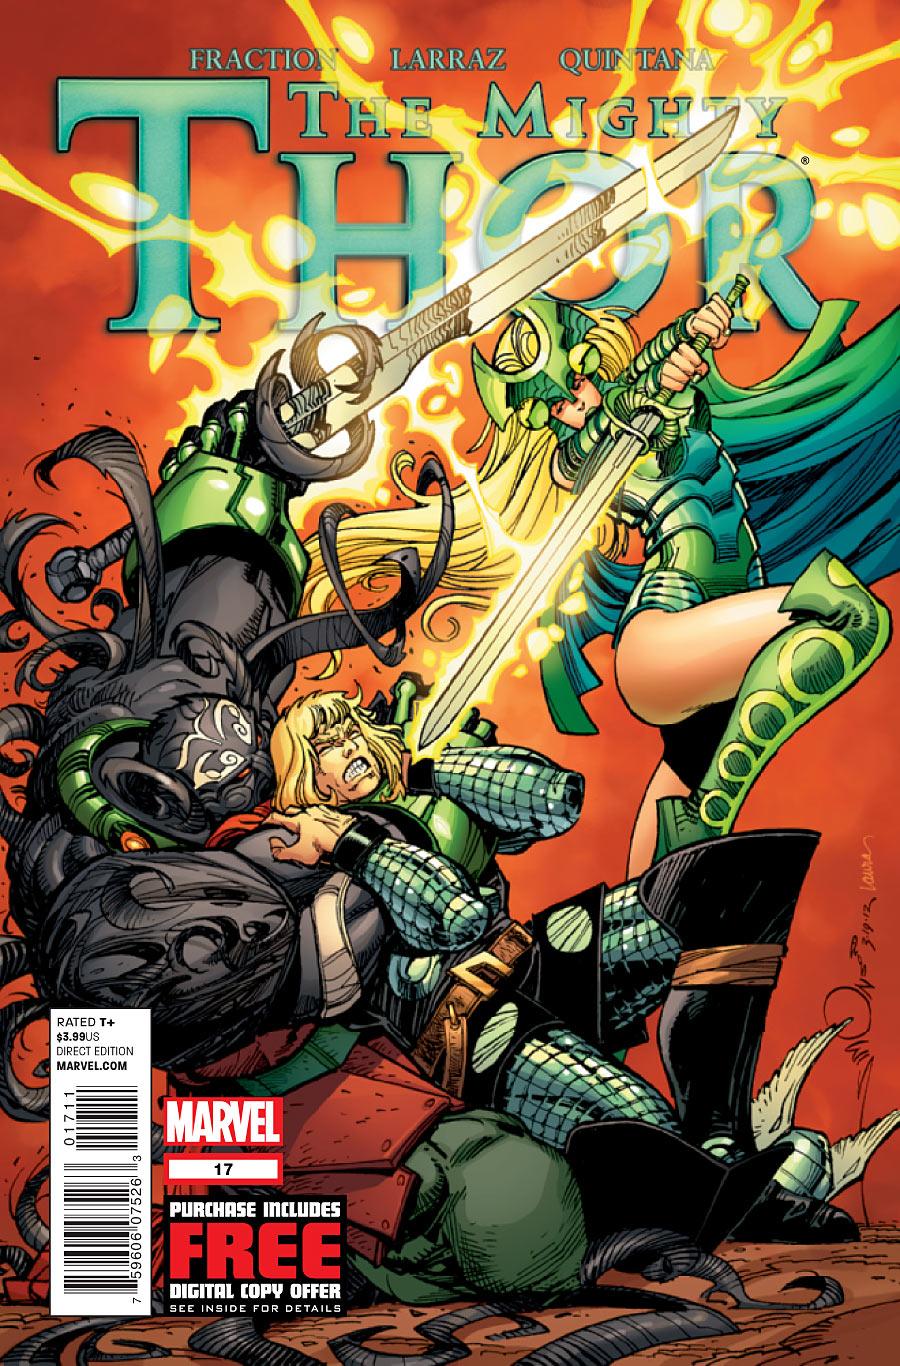 The Mighty Thor Vol. 1 #17